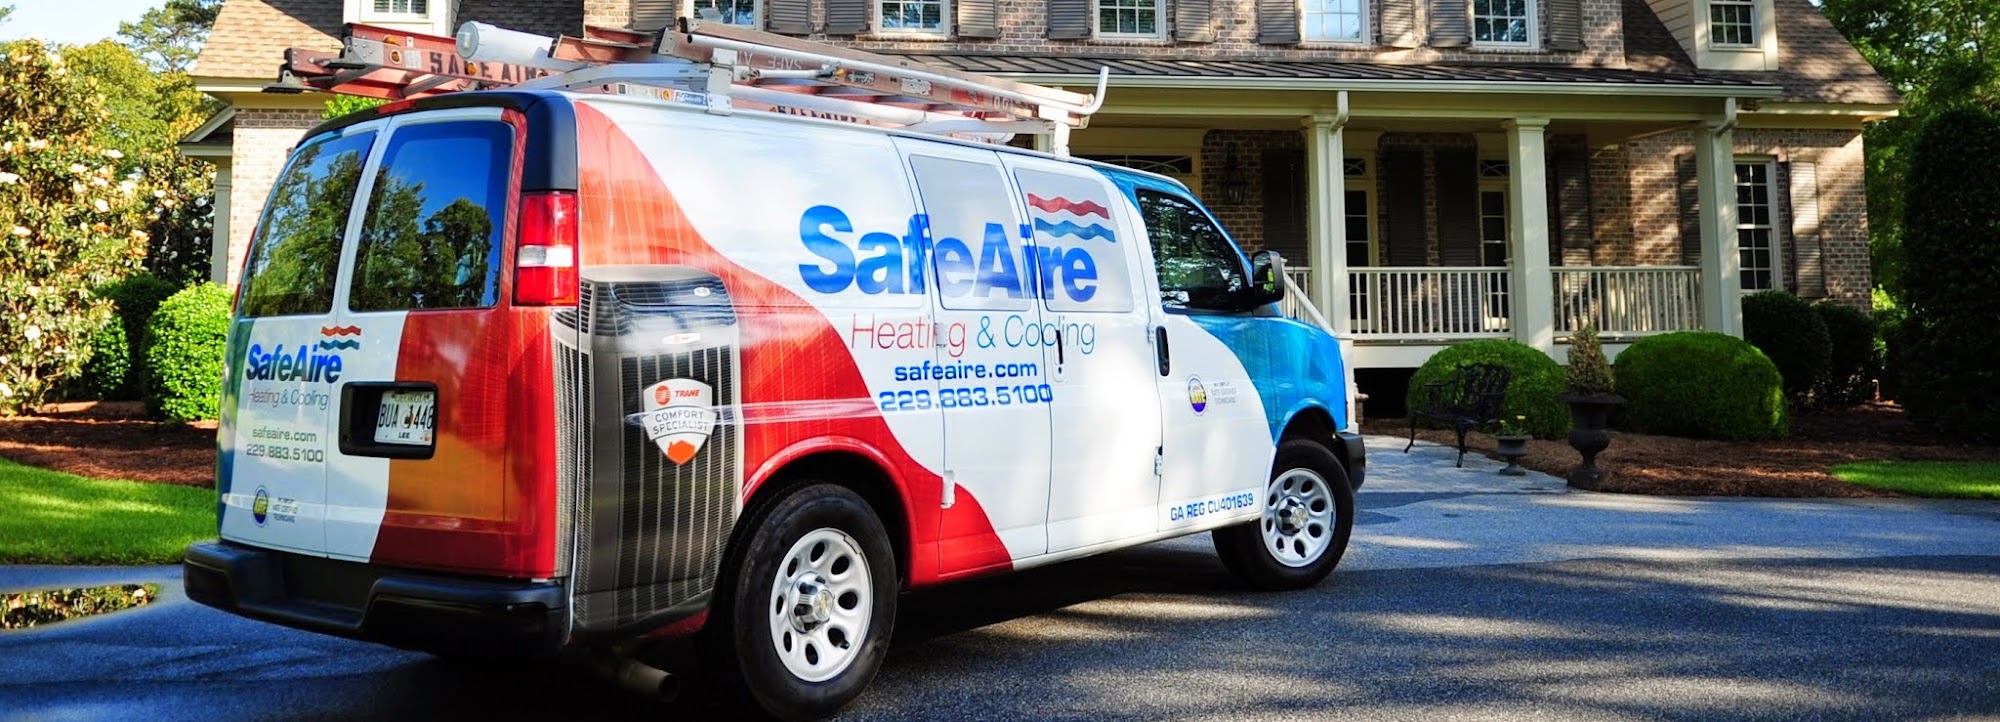 SafeAire Heating & Cooling 114 W 9th Ave, Cordele Georgia 31015